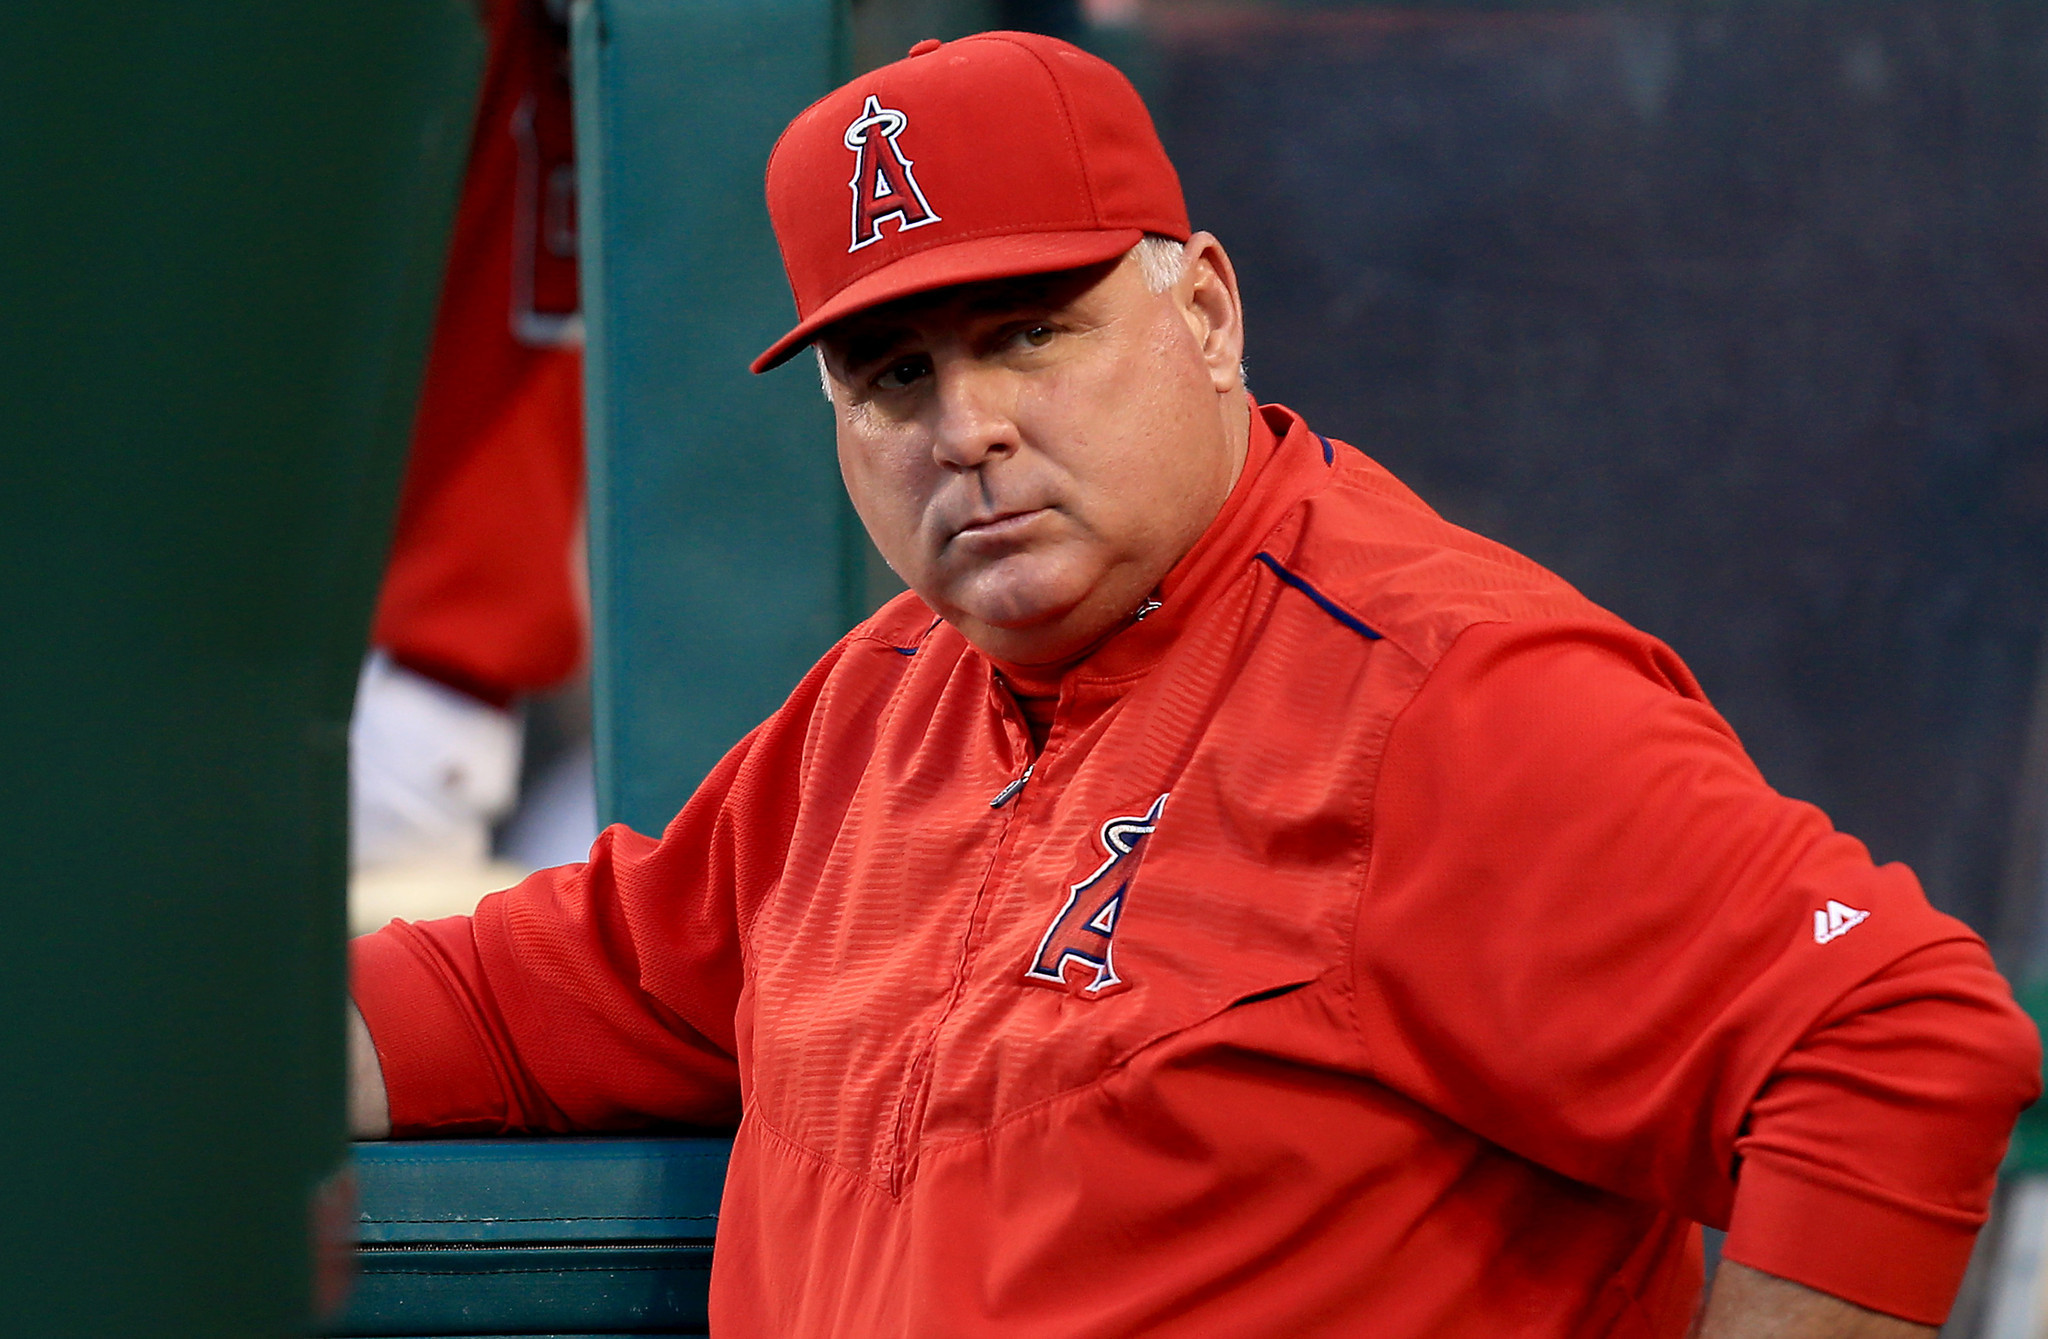 la-sp-sn-angels-mike-scioscia-ranked-highly-mlb-executives-20150703